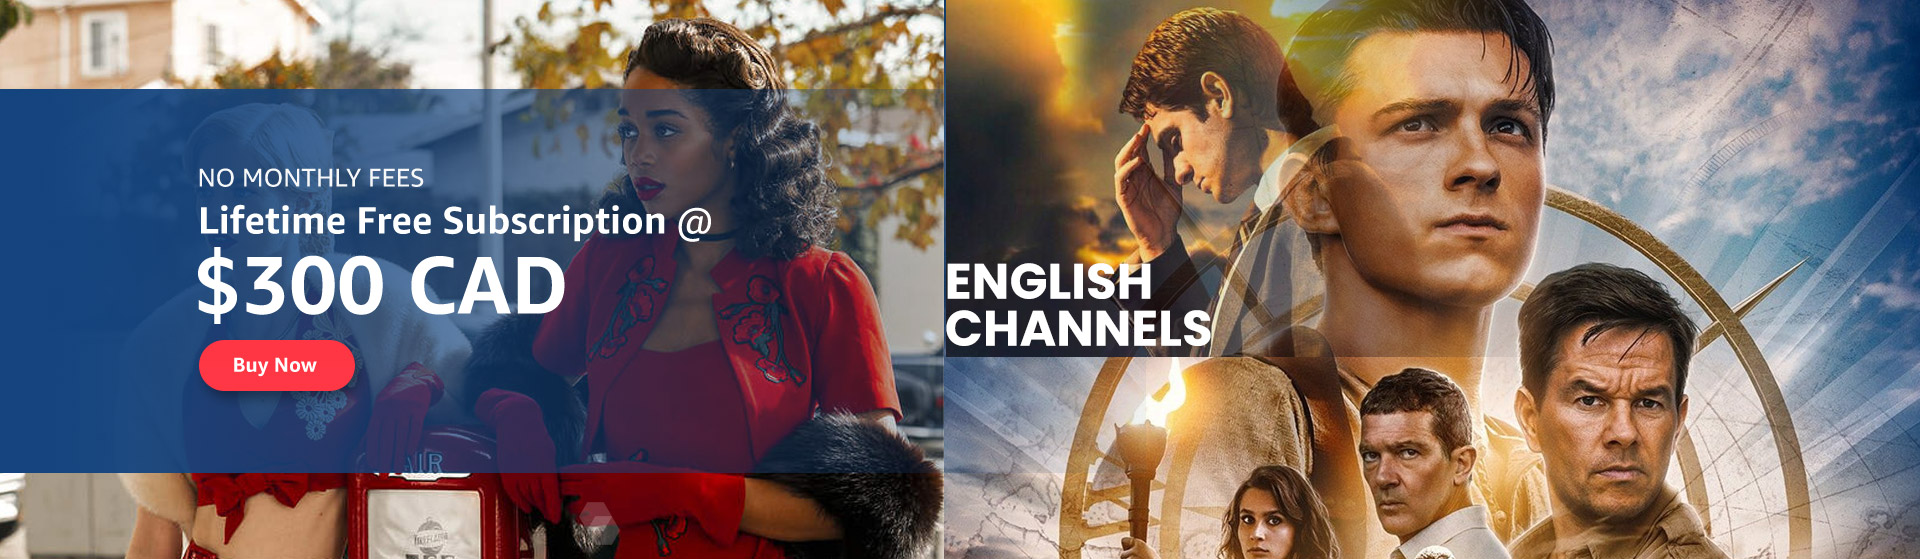 English Channels with Vois IPTV